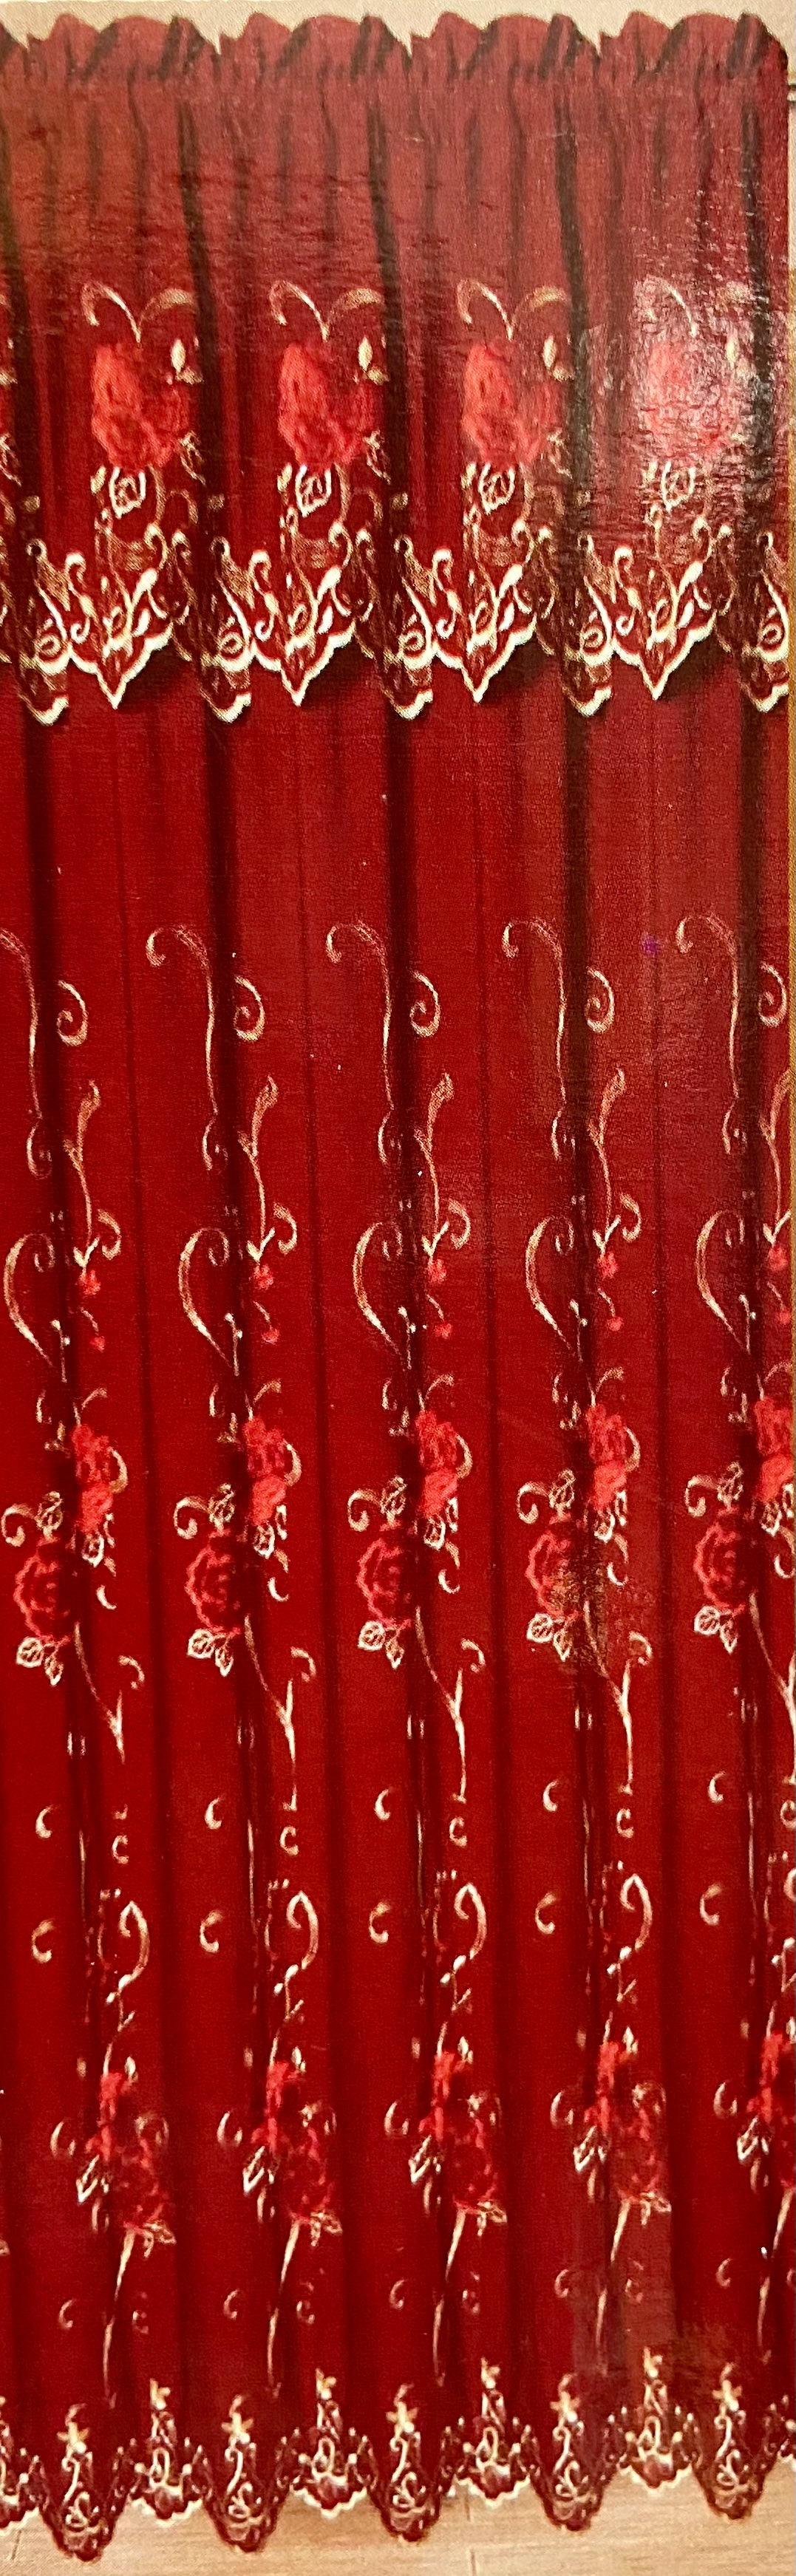 Darden Curtain with Attached Valance